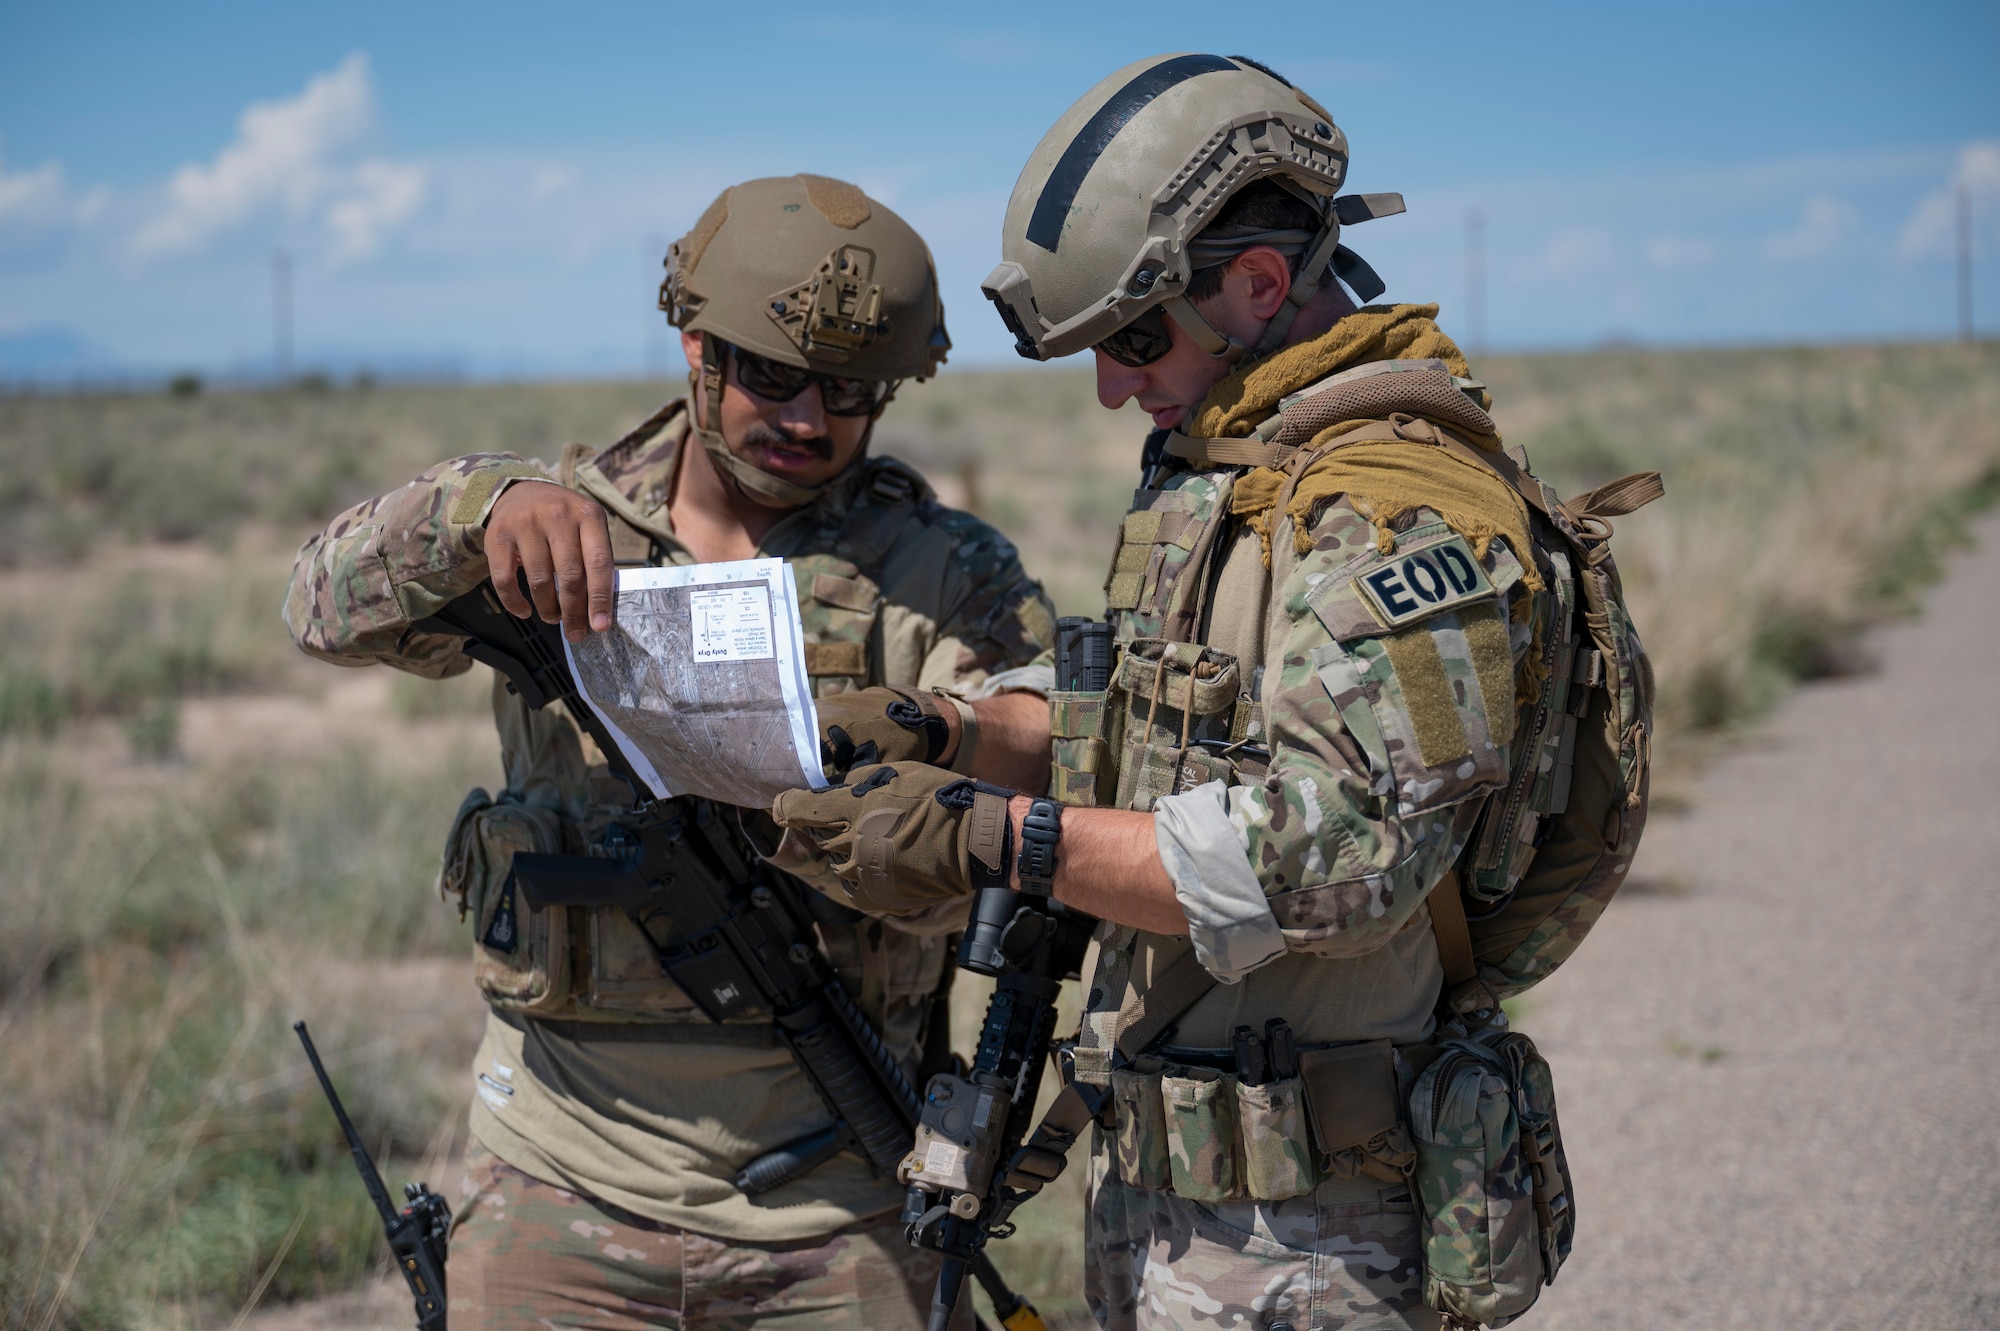 U.S. Air Force Tech. Sgt. Nathan Hollibaugh, left, 49th Civil Engineer Squadron explosive ordnance disposal NCO of quality assurance, and U.S. Air Force Senior Airman Patrick Conte, 49th CES EOD training manager, review coordinates on a map during a land navigation exercise at Holloman Air Force Base, New Mexico, Sep. 18, 2023. The EOD flight applies special techniques and procedures to lessen or remove the hazards created by the presence of unexploded ordnance. (U.S. Air Force photo by Airman 1st Class Michelle Ferrari)